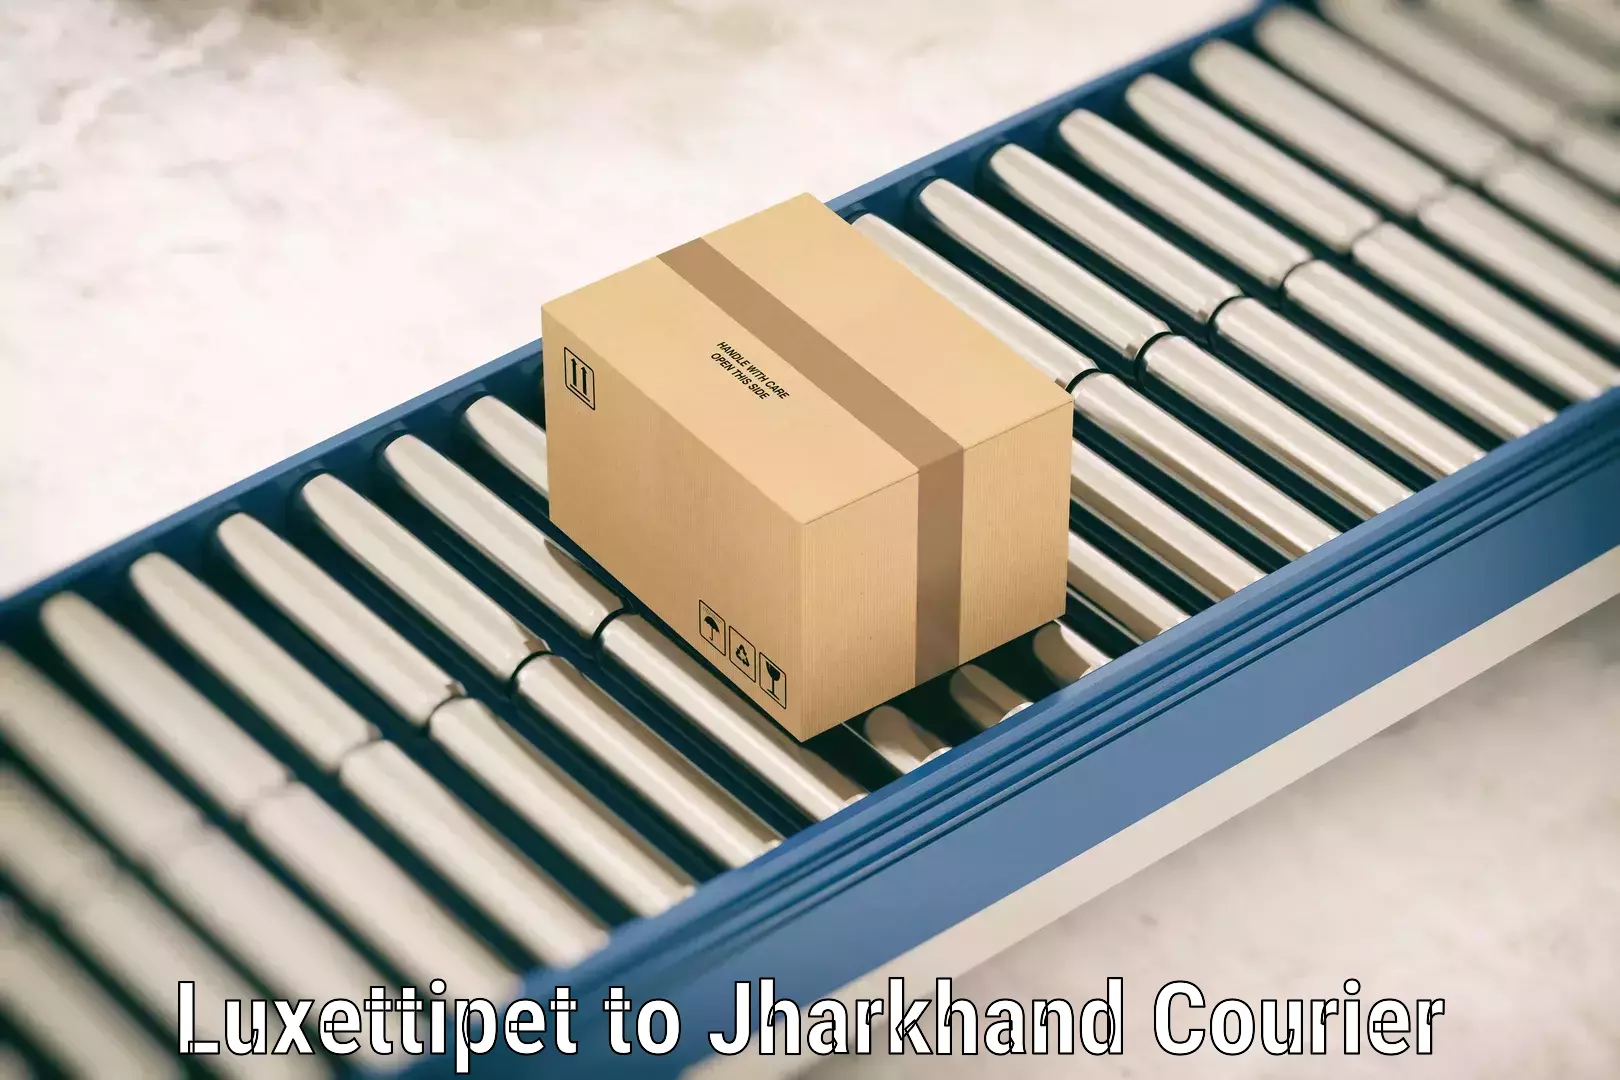 Luggage delivery logistics Luxettipet to Jharkhand